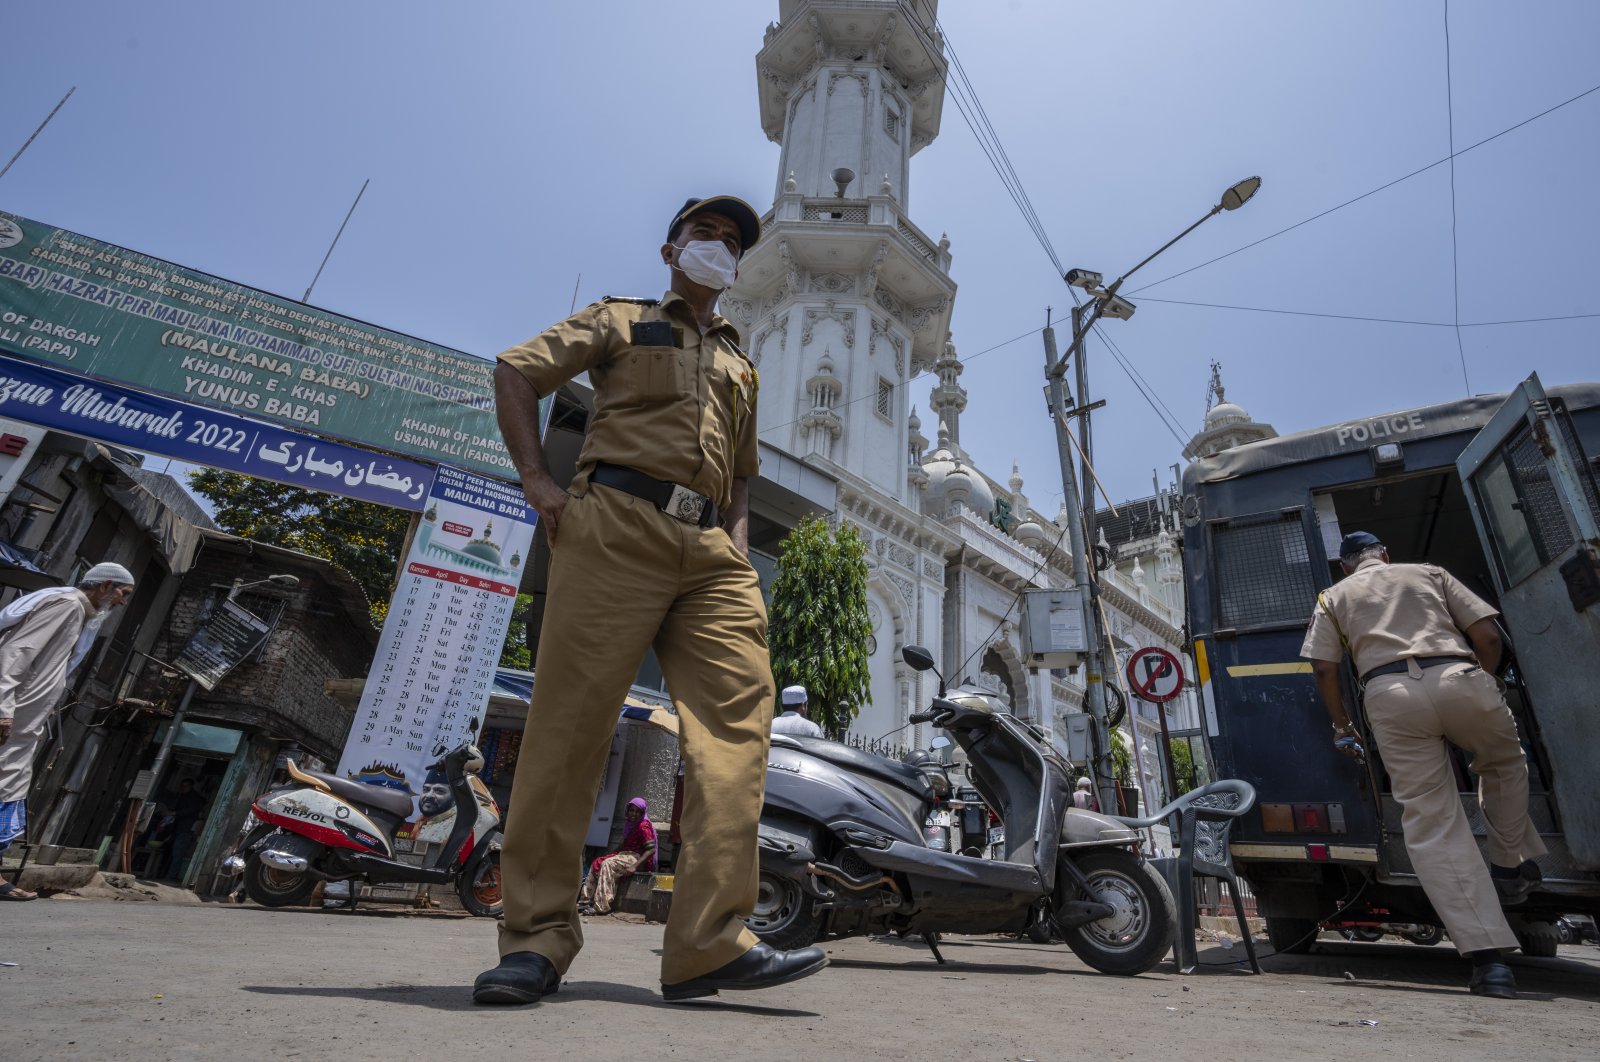 Police officers patrol outside a mosque as a man arrives to offer afternoon prayers in Mumbai, India, May 4, 2022. (AP Photo)